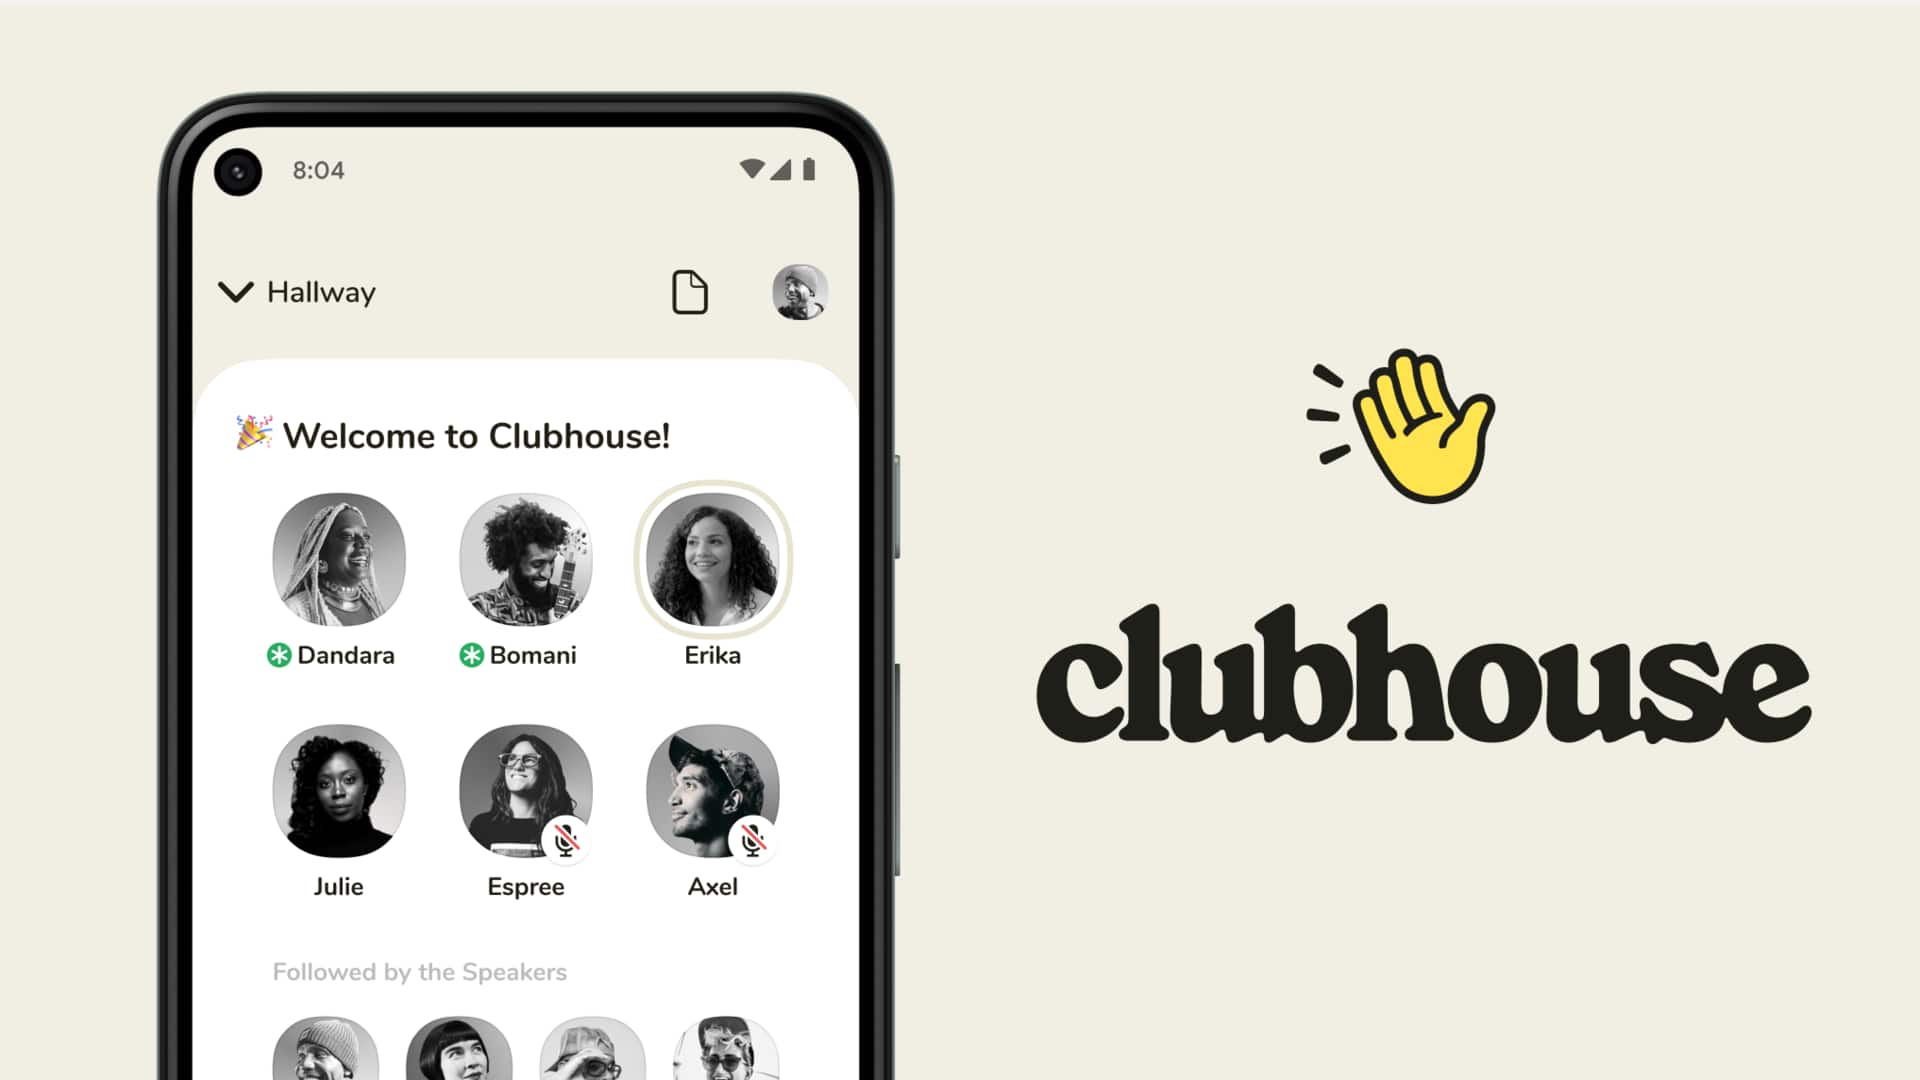 Clubhouse is 'resetting' by firing over 50% employees: Here's why